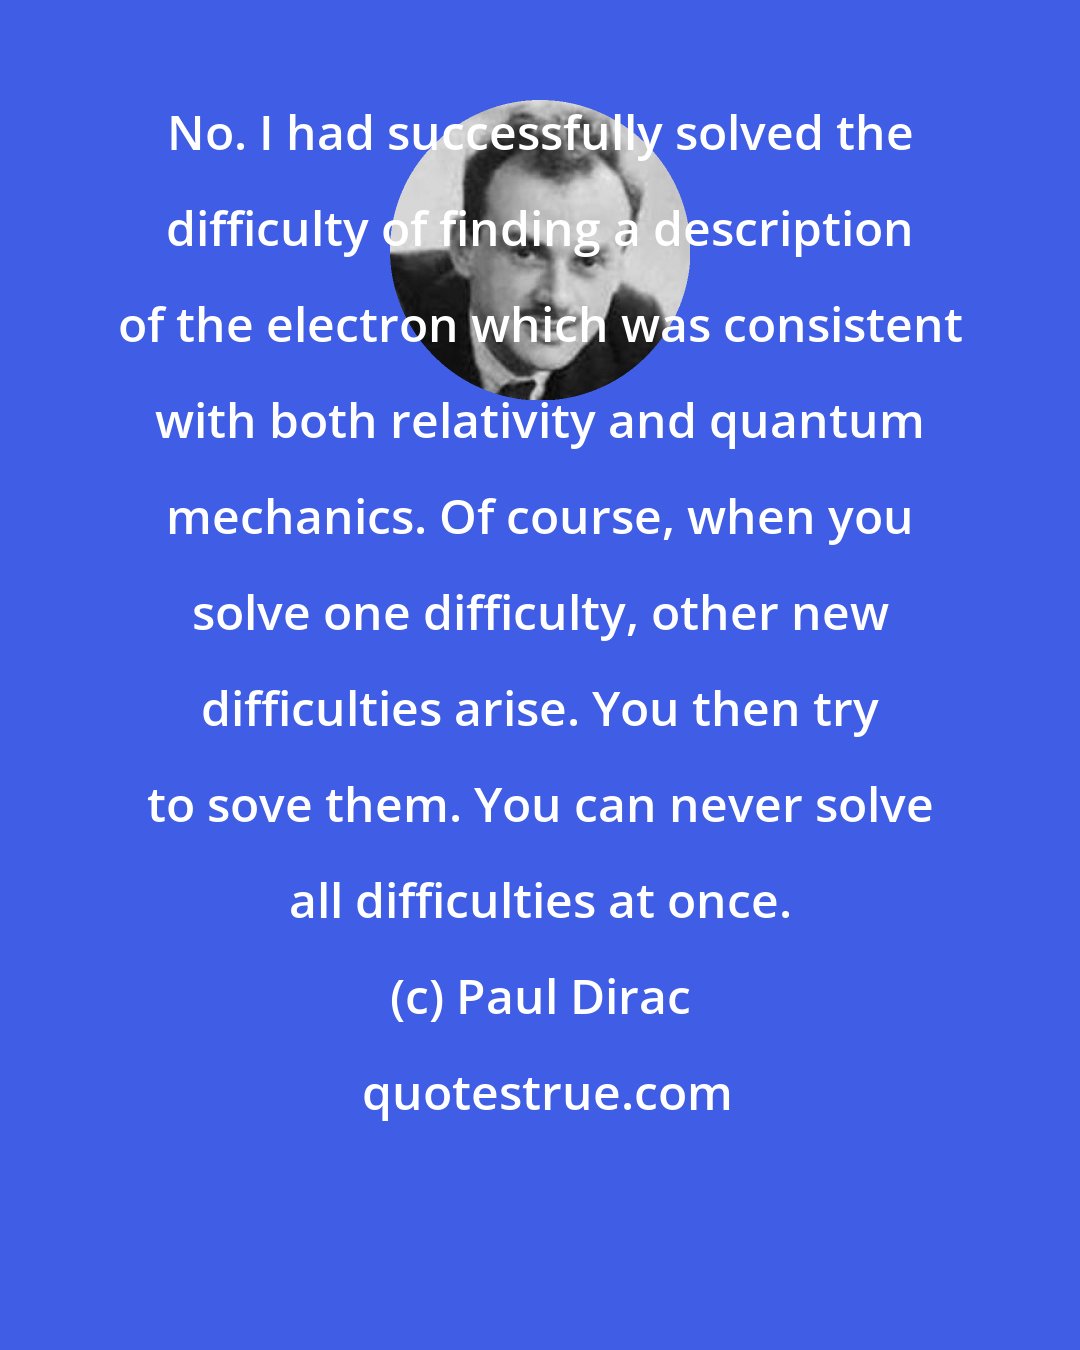 Paul Dirac: No. I had successfully solved the difficulty of finding a description of the electron which was consistent with both relativity and quantum mechanics. Of course, when you solve one difficulty, other new difficulties arise. You then try to sove them. You can never solve all difficulties at once.